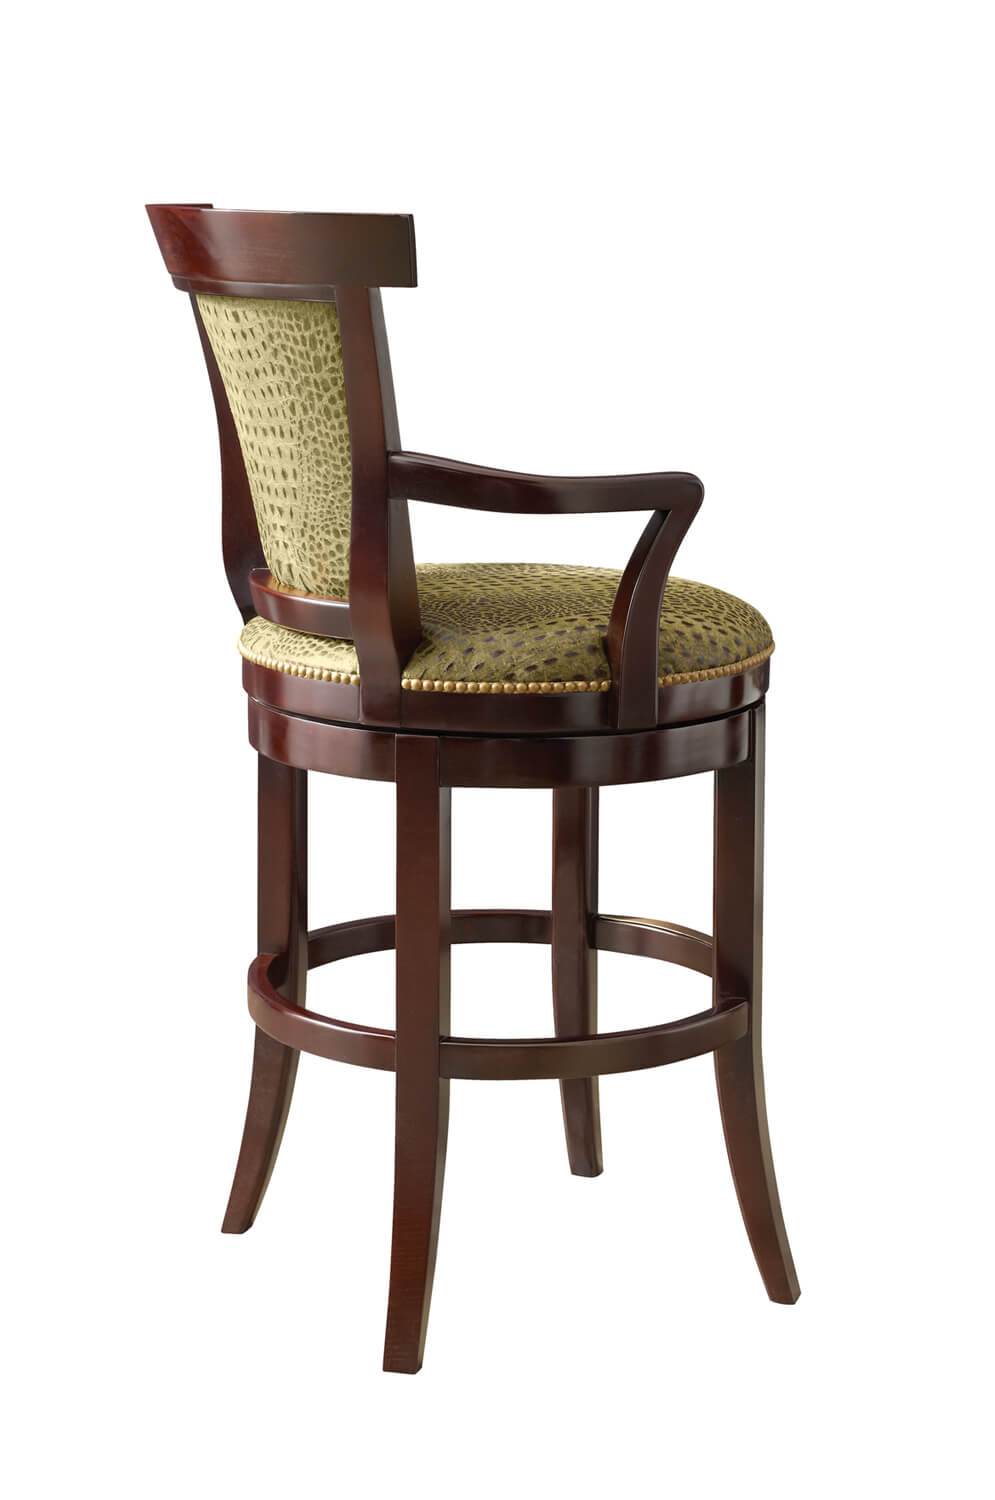 Leathercraft's Lowell 508 Traditional Wood Swivel Bar Stool with Arms - View of Back